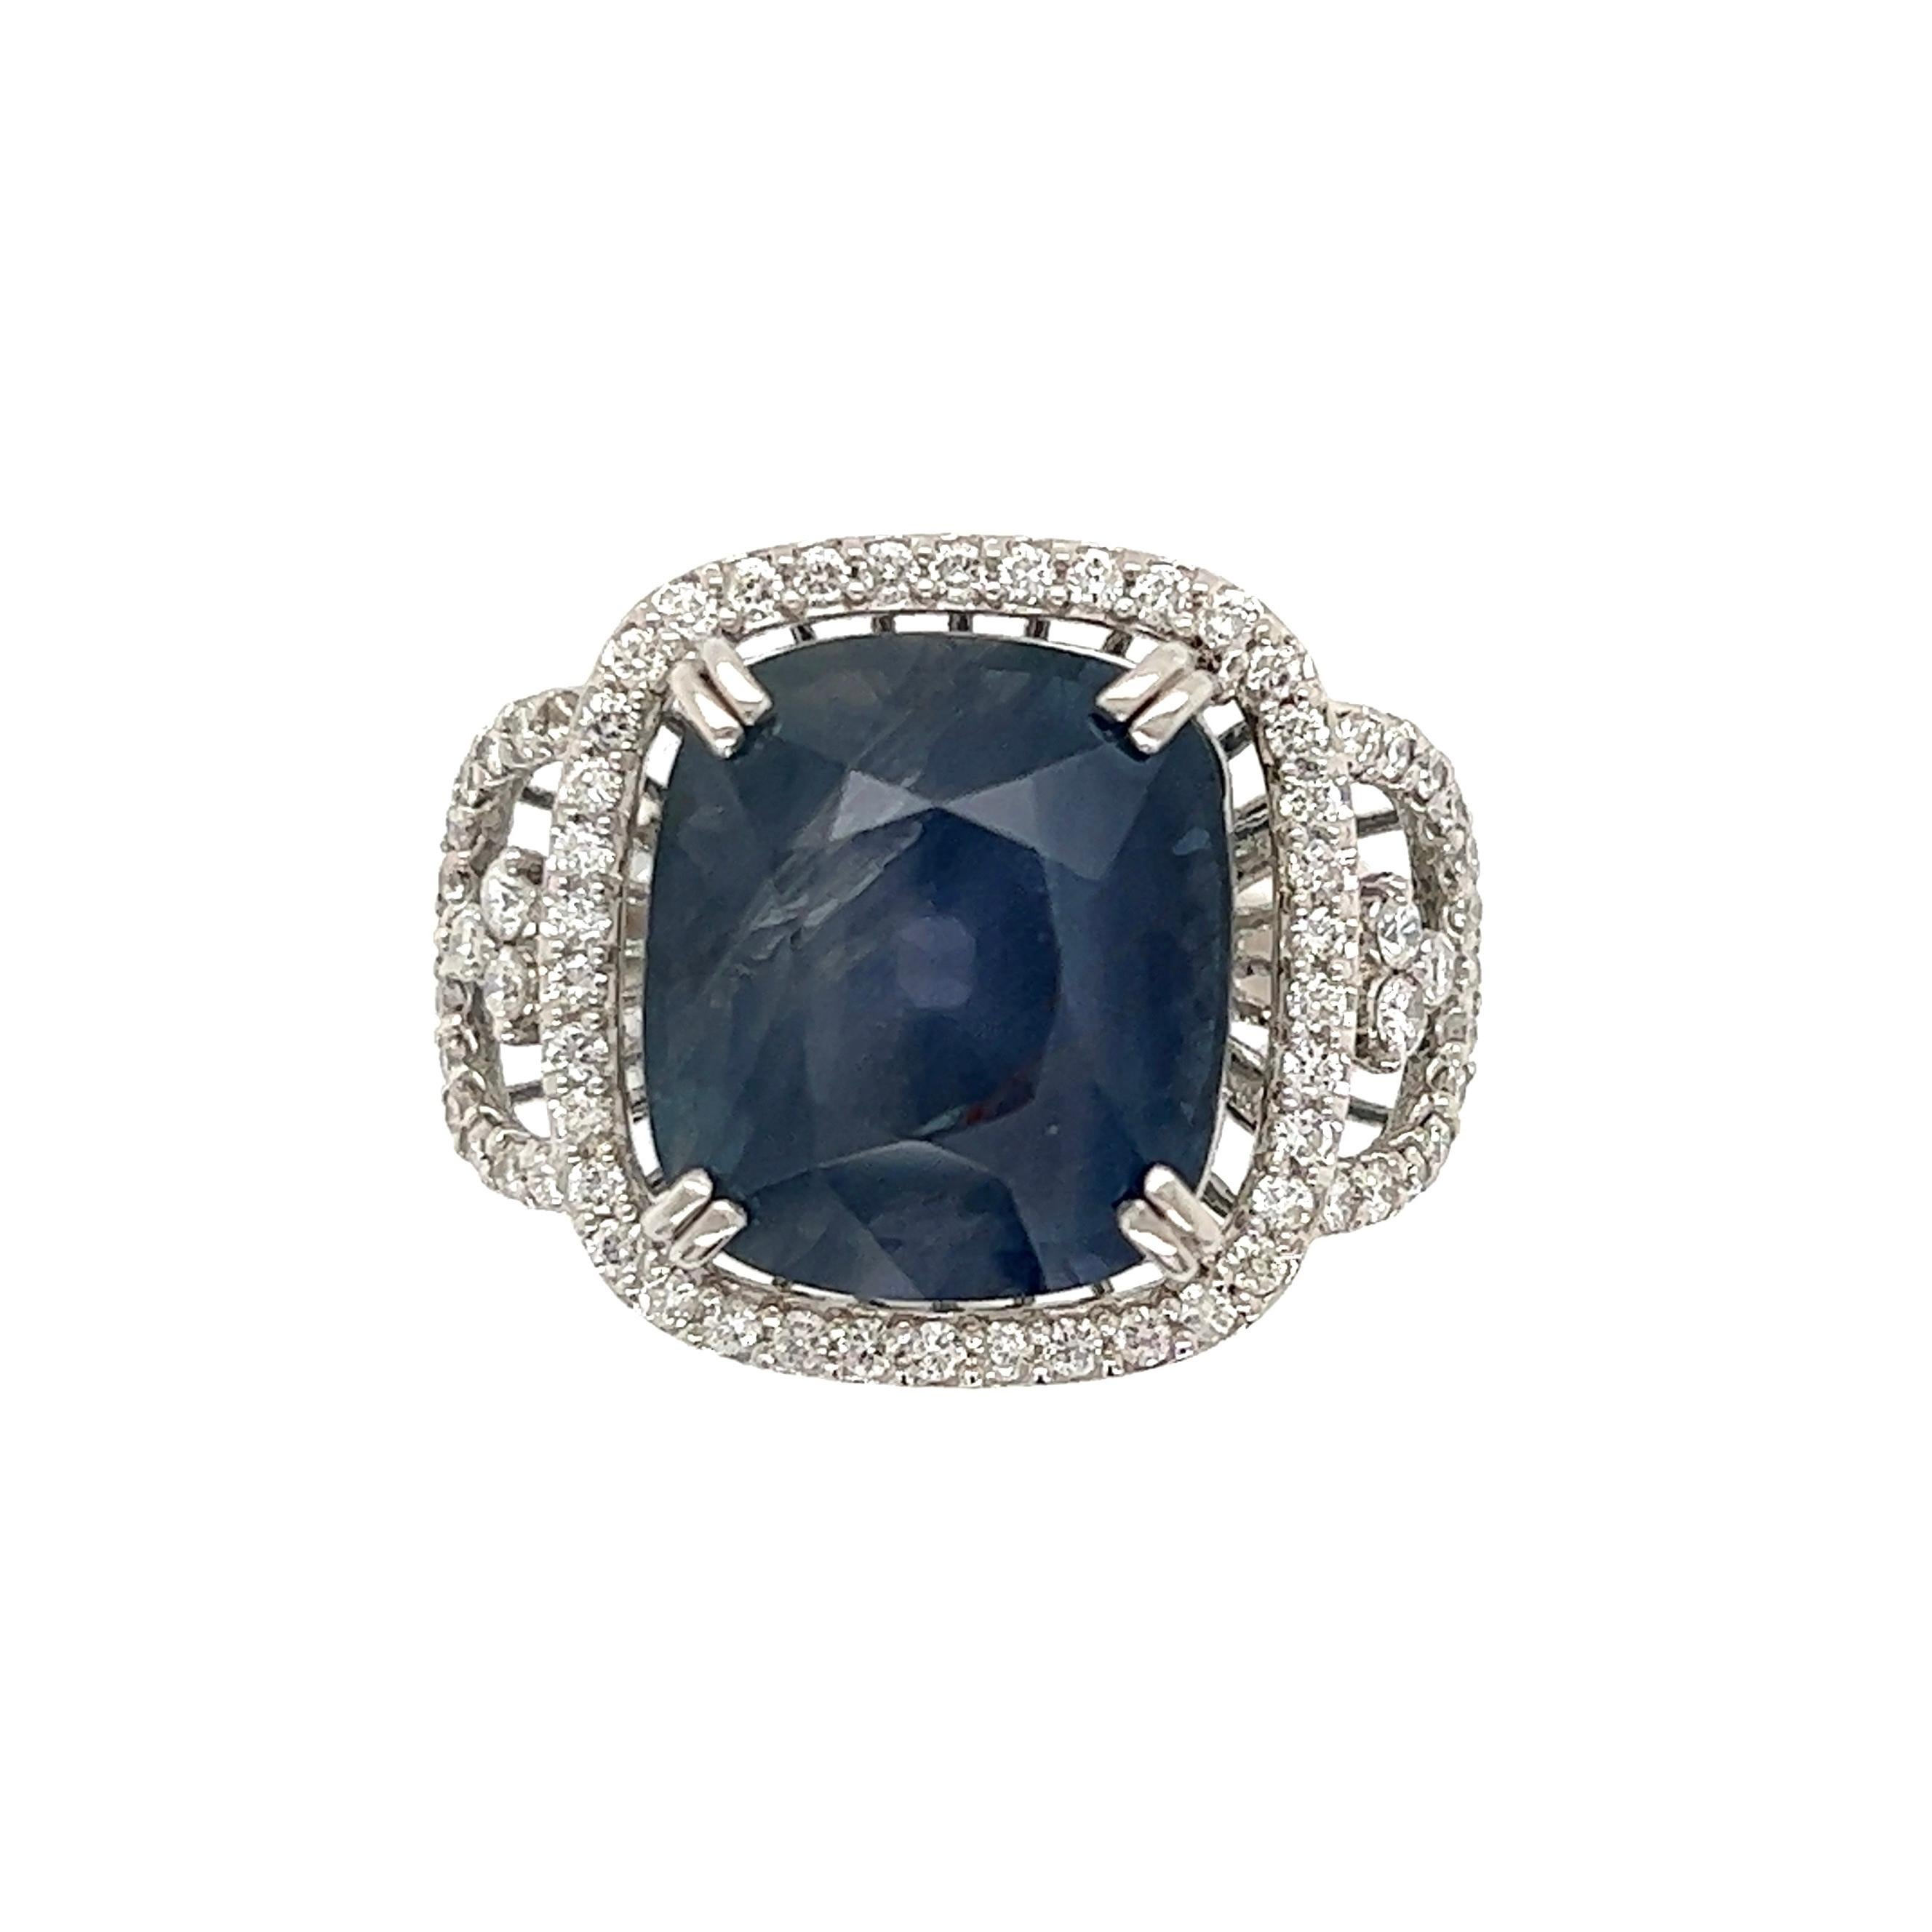 Simply Beautiful, Elegant and finely detailed Art Deco Revival Cushion-Cut Sapphire and Diamond Platinum Cocktail Ring. Center securely nestled with a 15.08 Carat Cushion Sapphire surrounded by Diamonds weighing approx. 0.66tcw and enhancing the